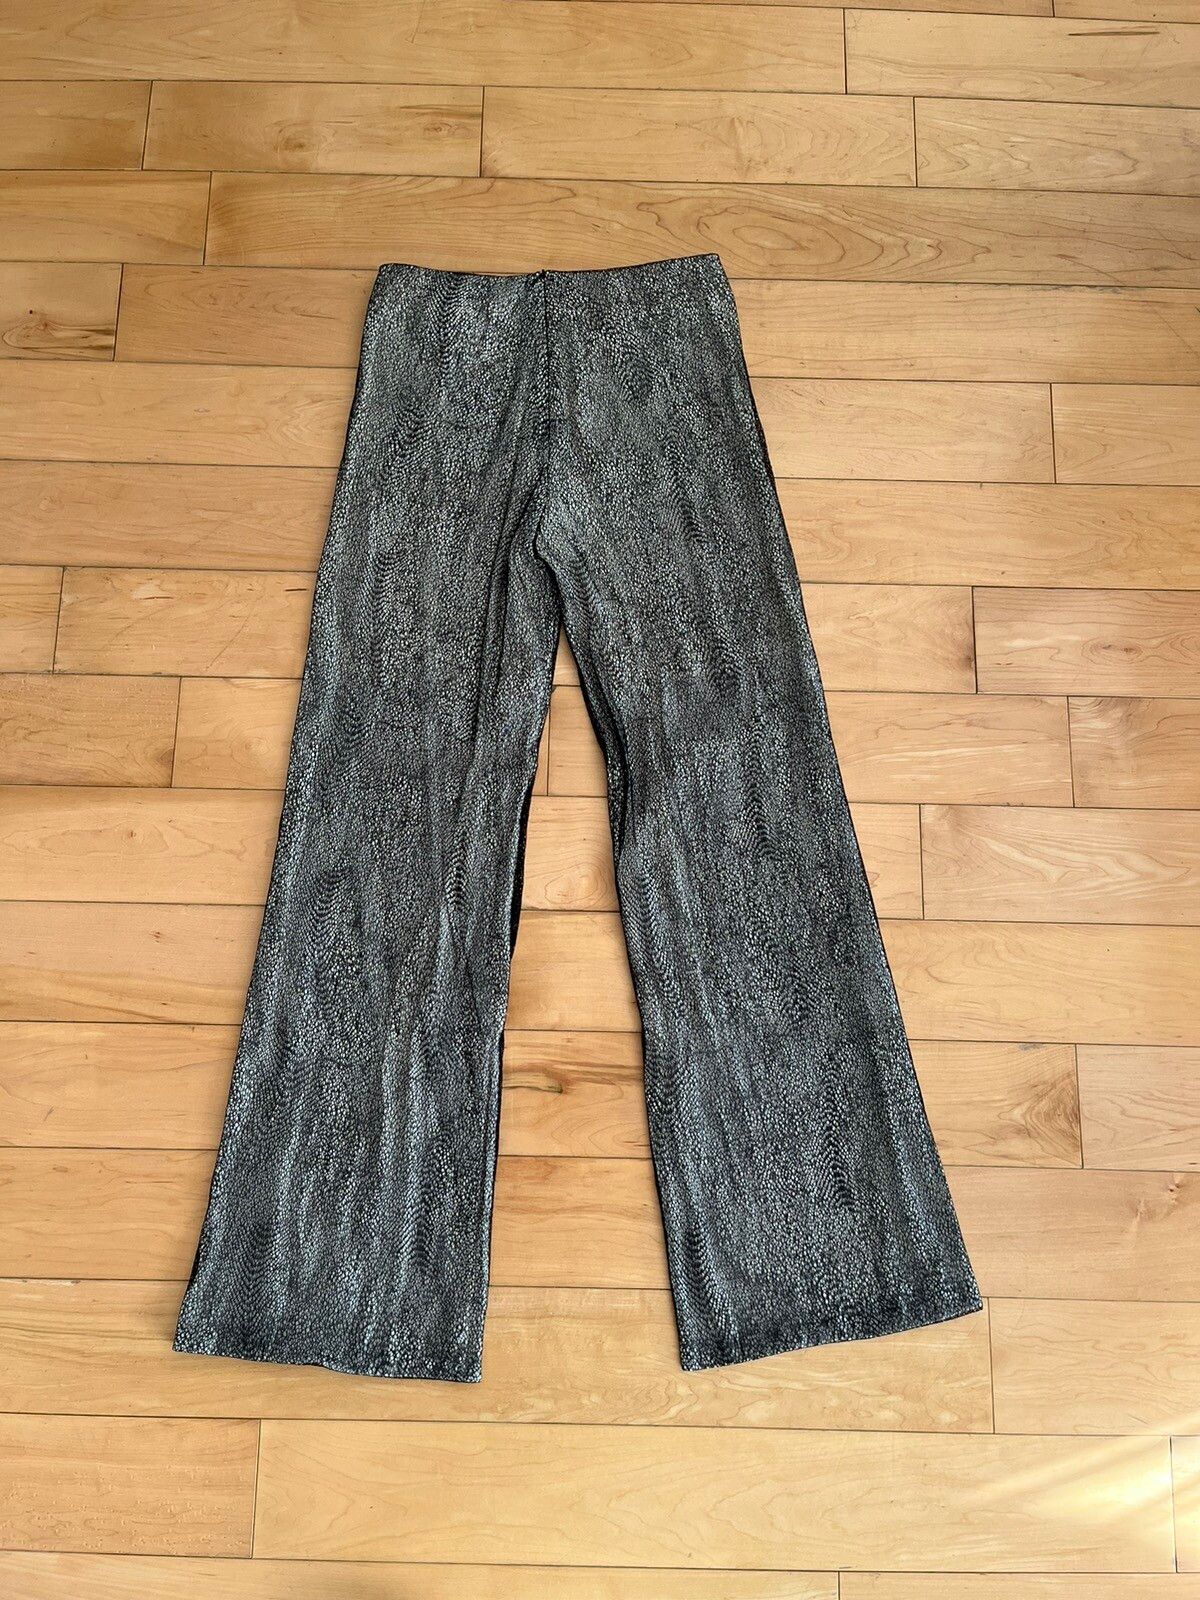 Other - NWT - Extremely Rare S/S15 Iris Van Herpen Pants - 2